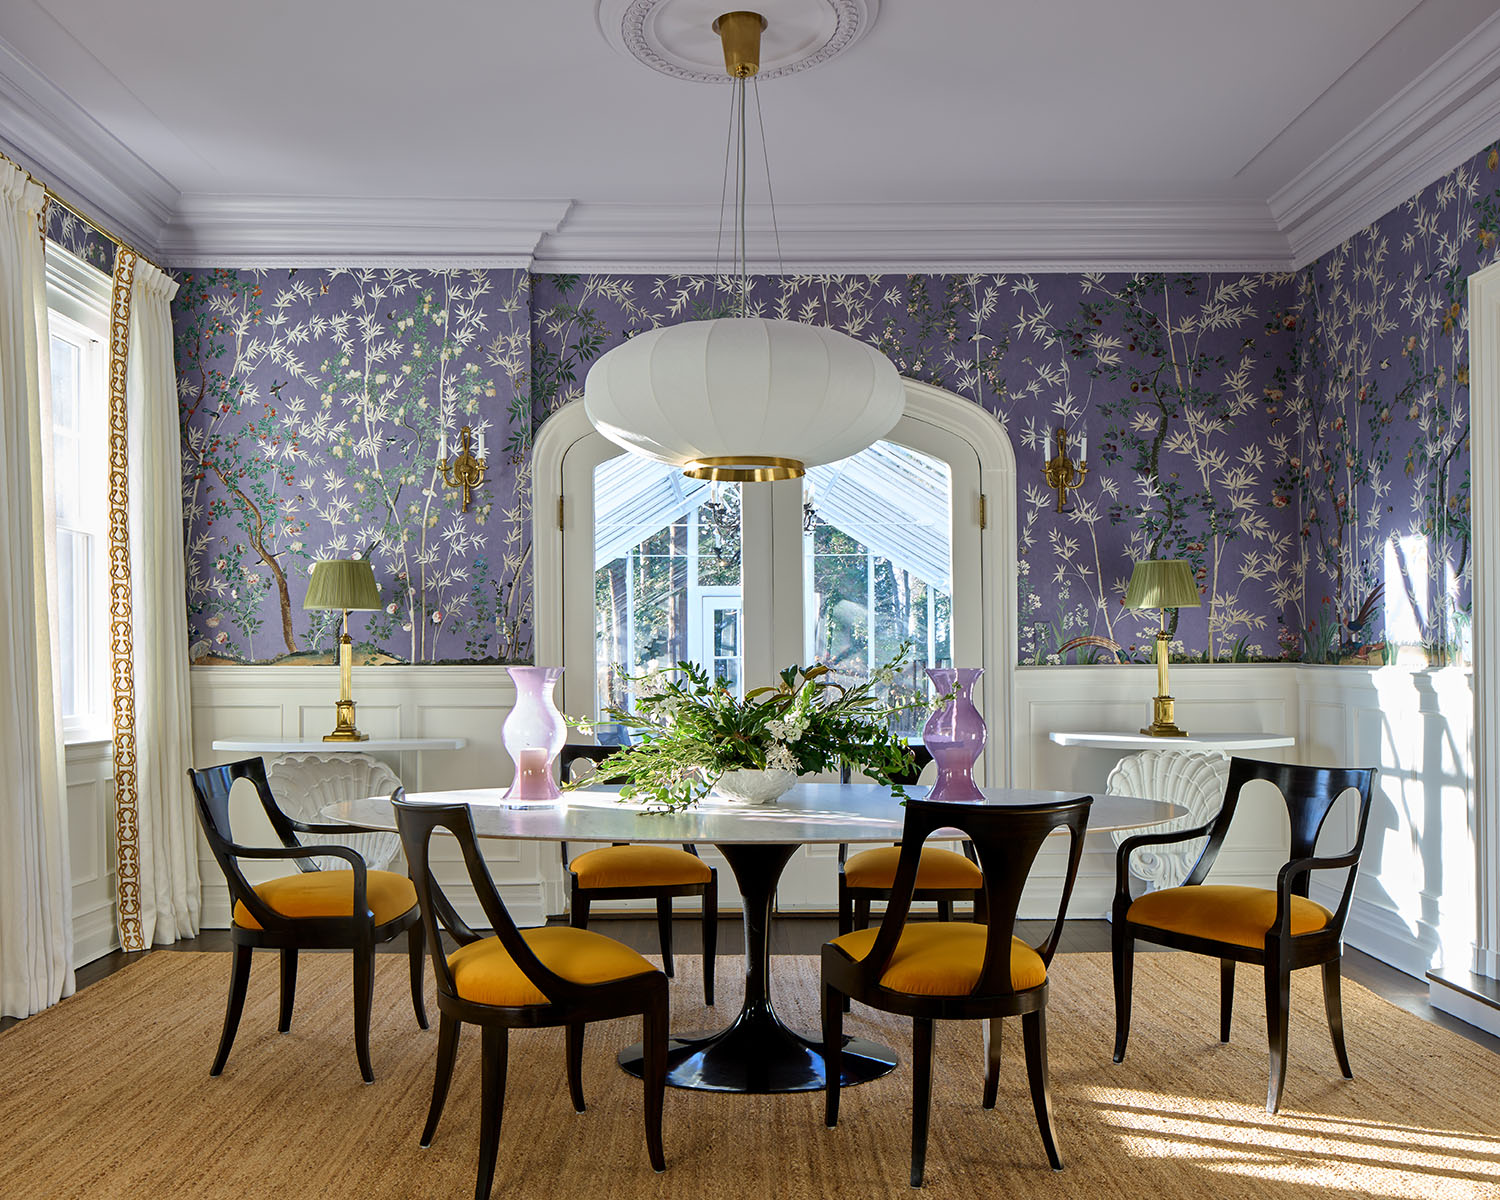 Elegant dining room adorned in rich violet hues, with floral wallpaper and vases. A contemporary round table with black and orange chairs juxtaposes the otherwise traditional decor.